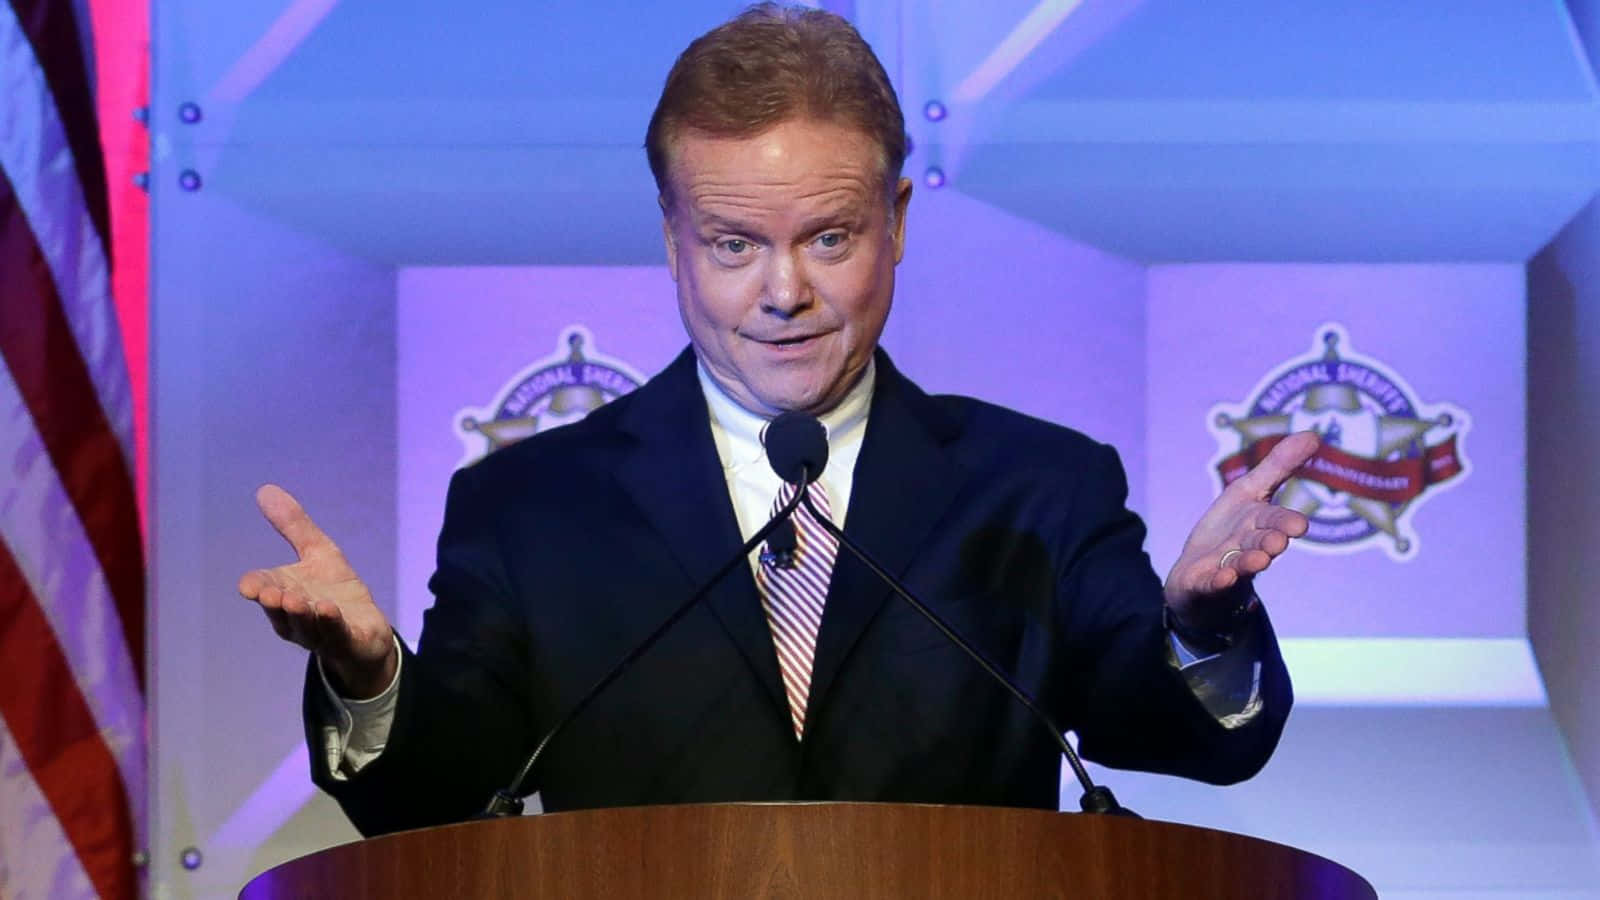 Jimwebb Pekar På Publiken. (in The Context Of Computer Or Mobile Wallpaper, This Phrase Would Likely Be Used As A Caption Or Description Of An Image Featuring Jim Webb Pointing At The Audience.) Wallpaper